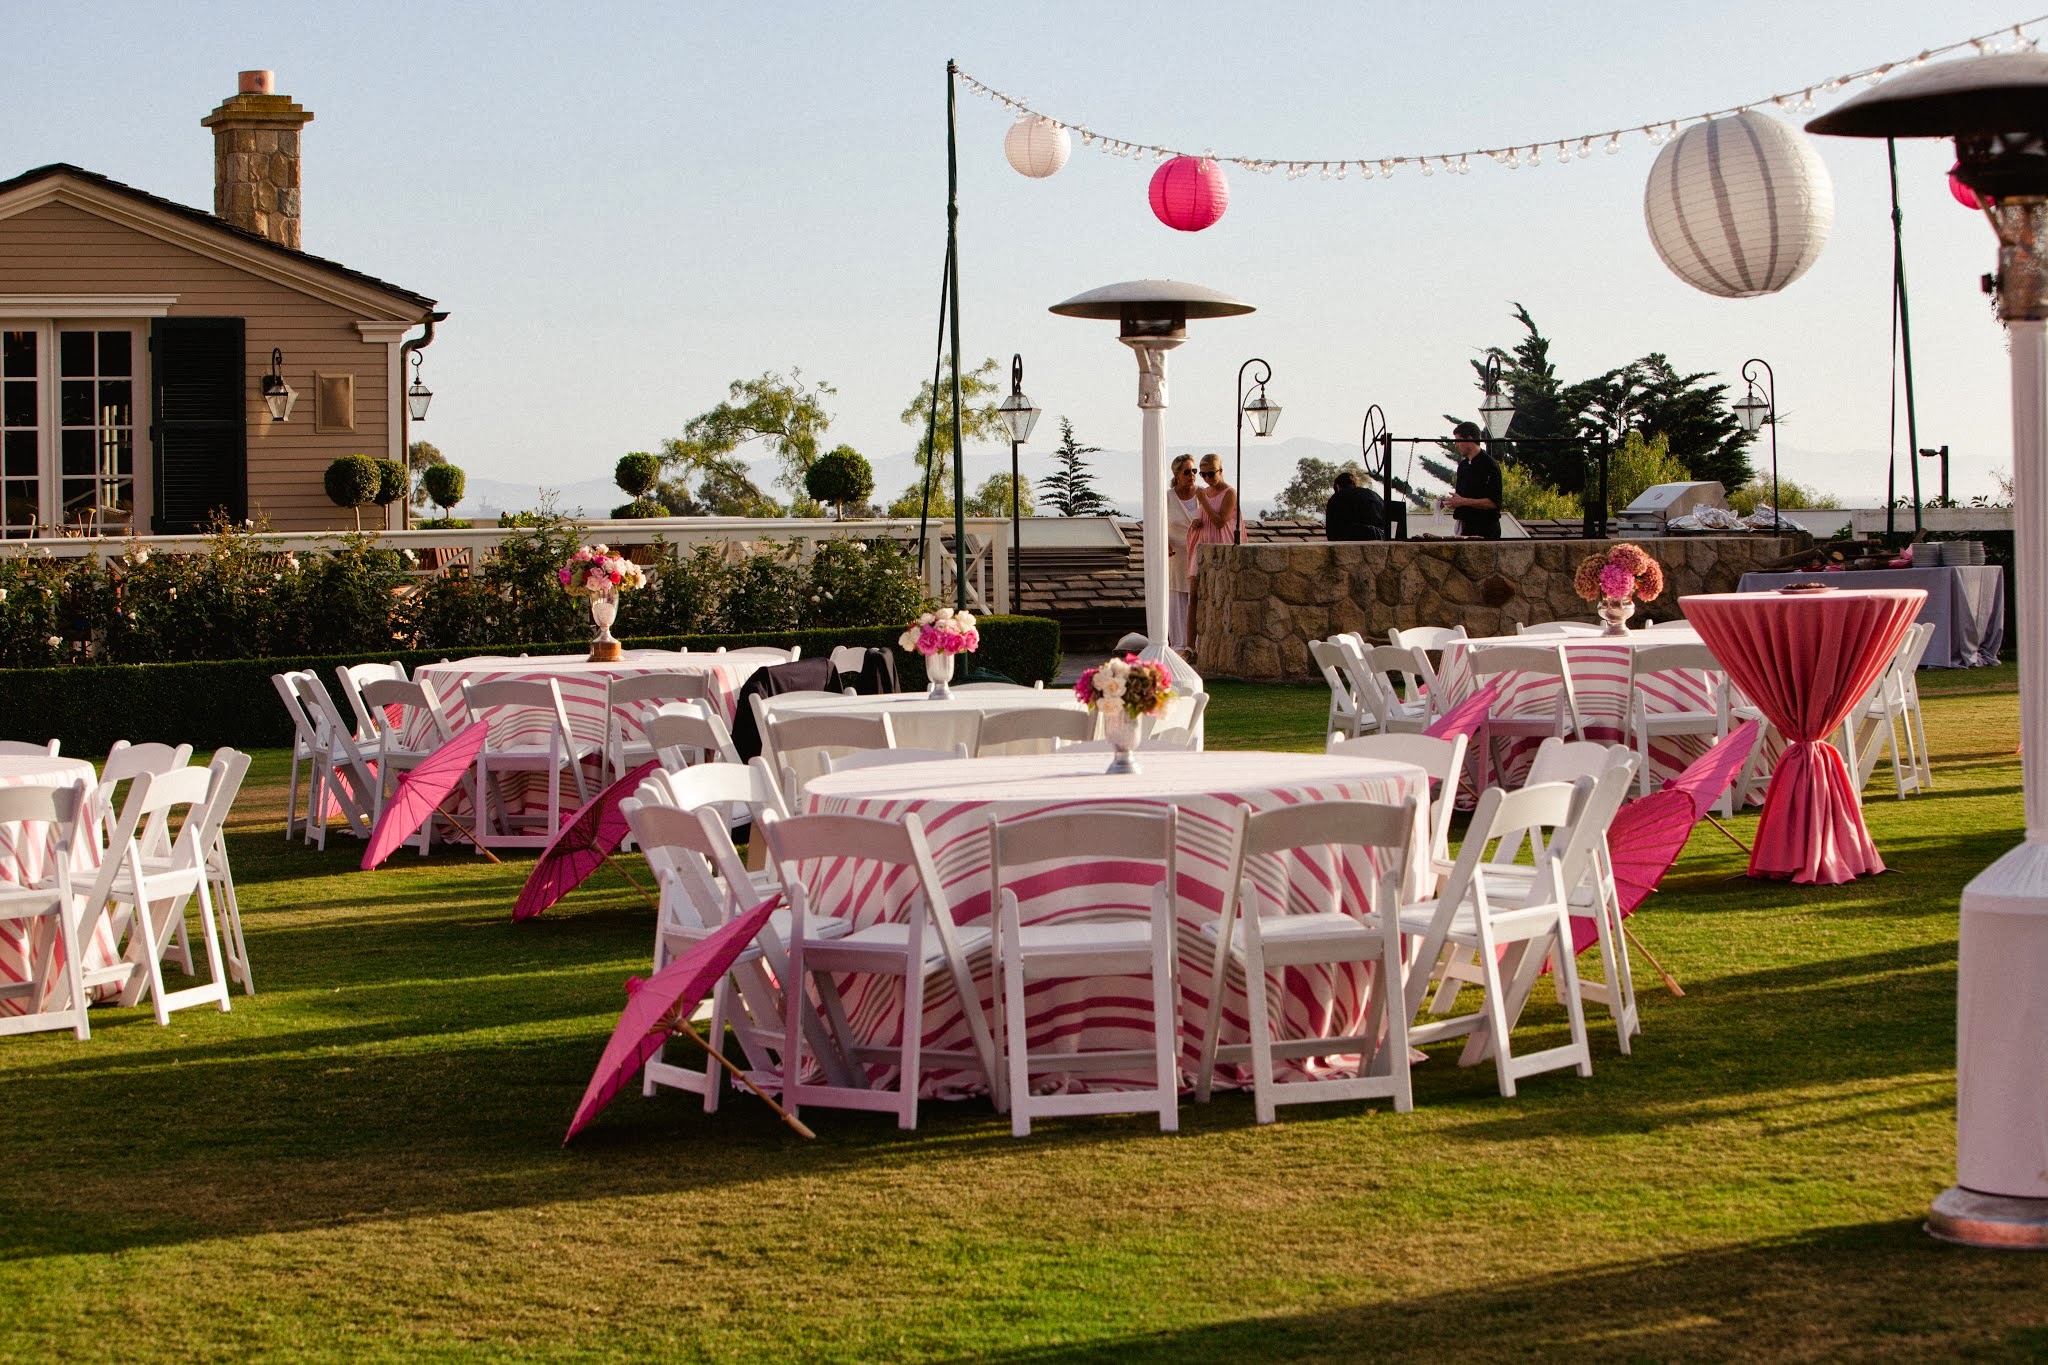 www.FeliciEvents | Pink Polo Party | Funraising Event | Felici Fundraiser | Polo Theme | Clarissa Koenig Photography | Hanging Lanterns